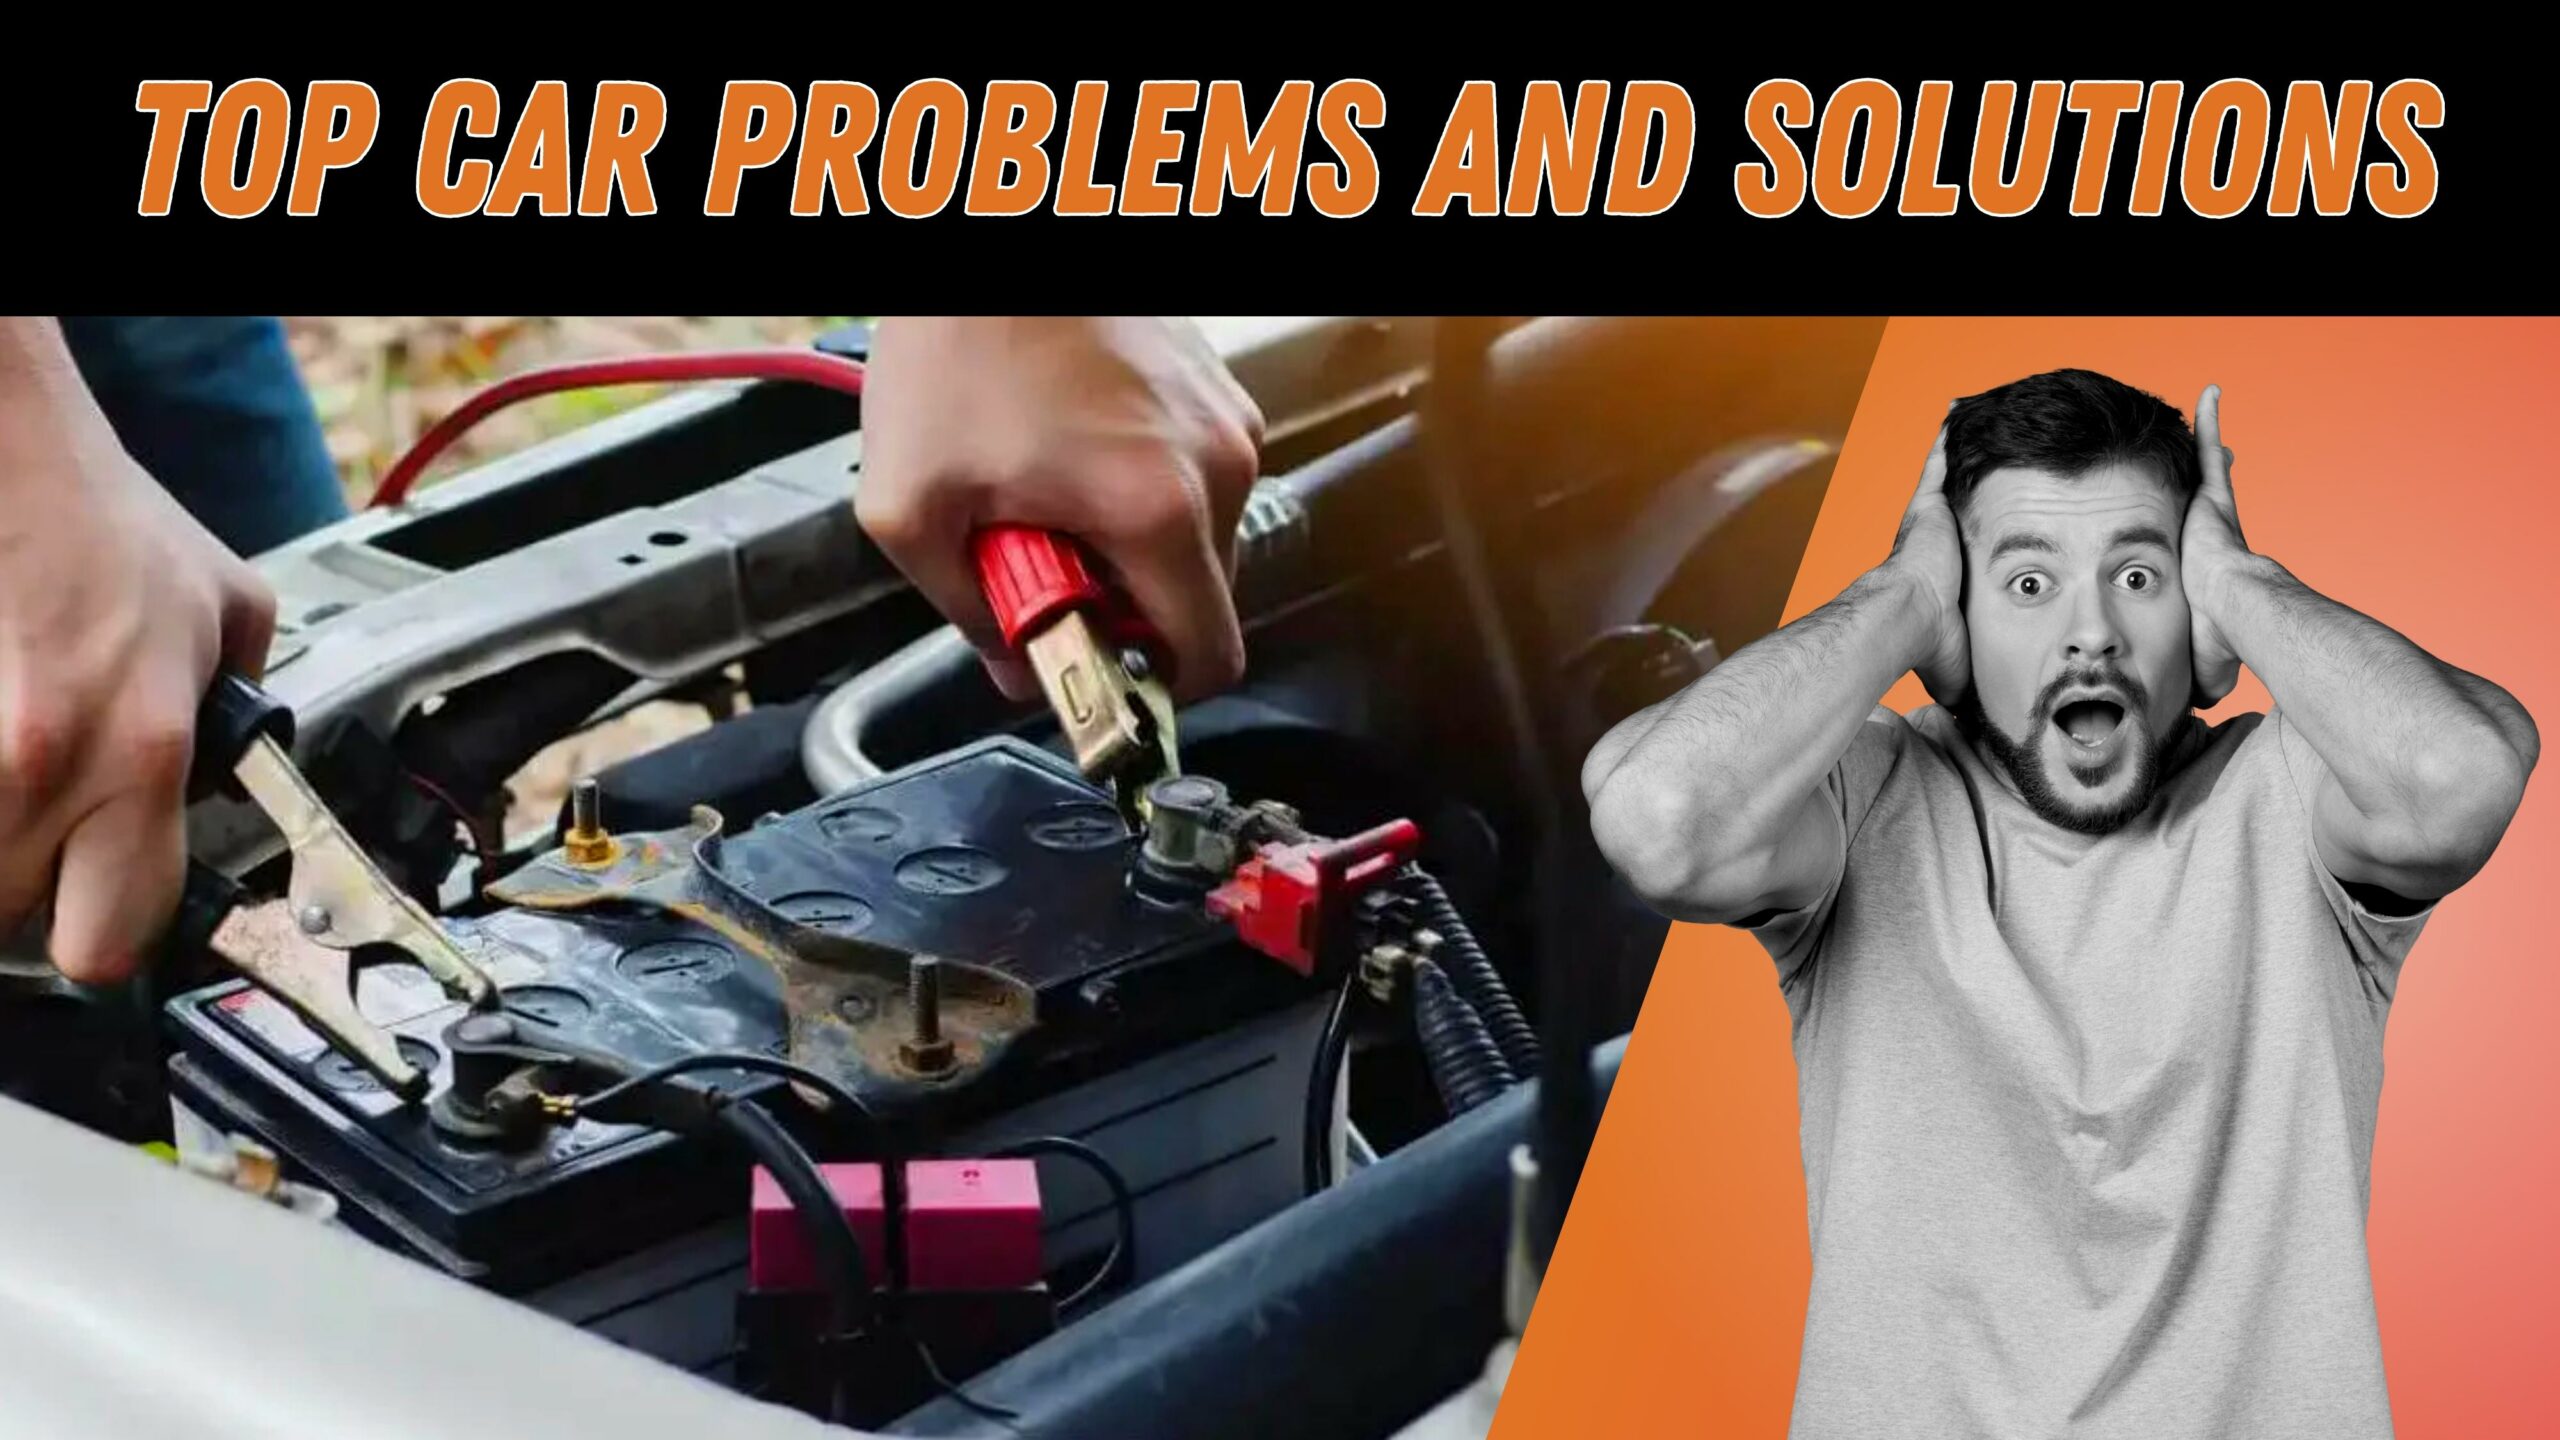 Top Car Problems and Solutions